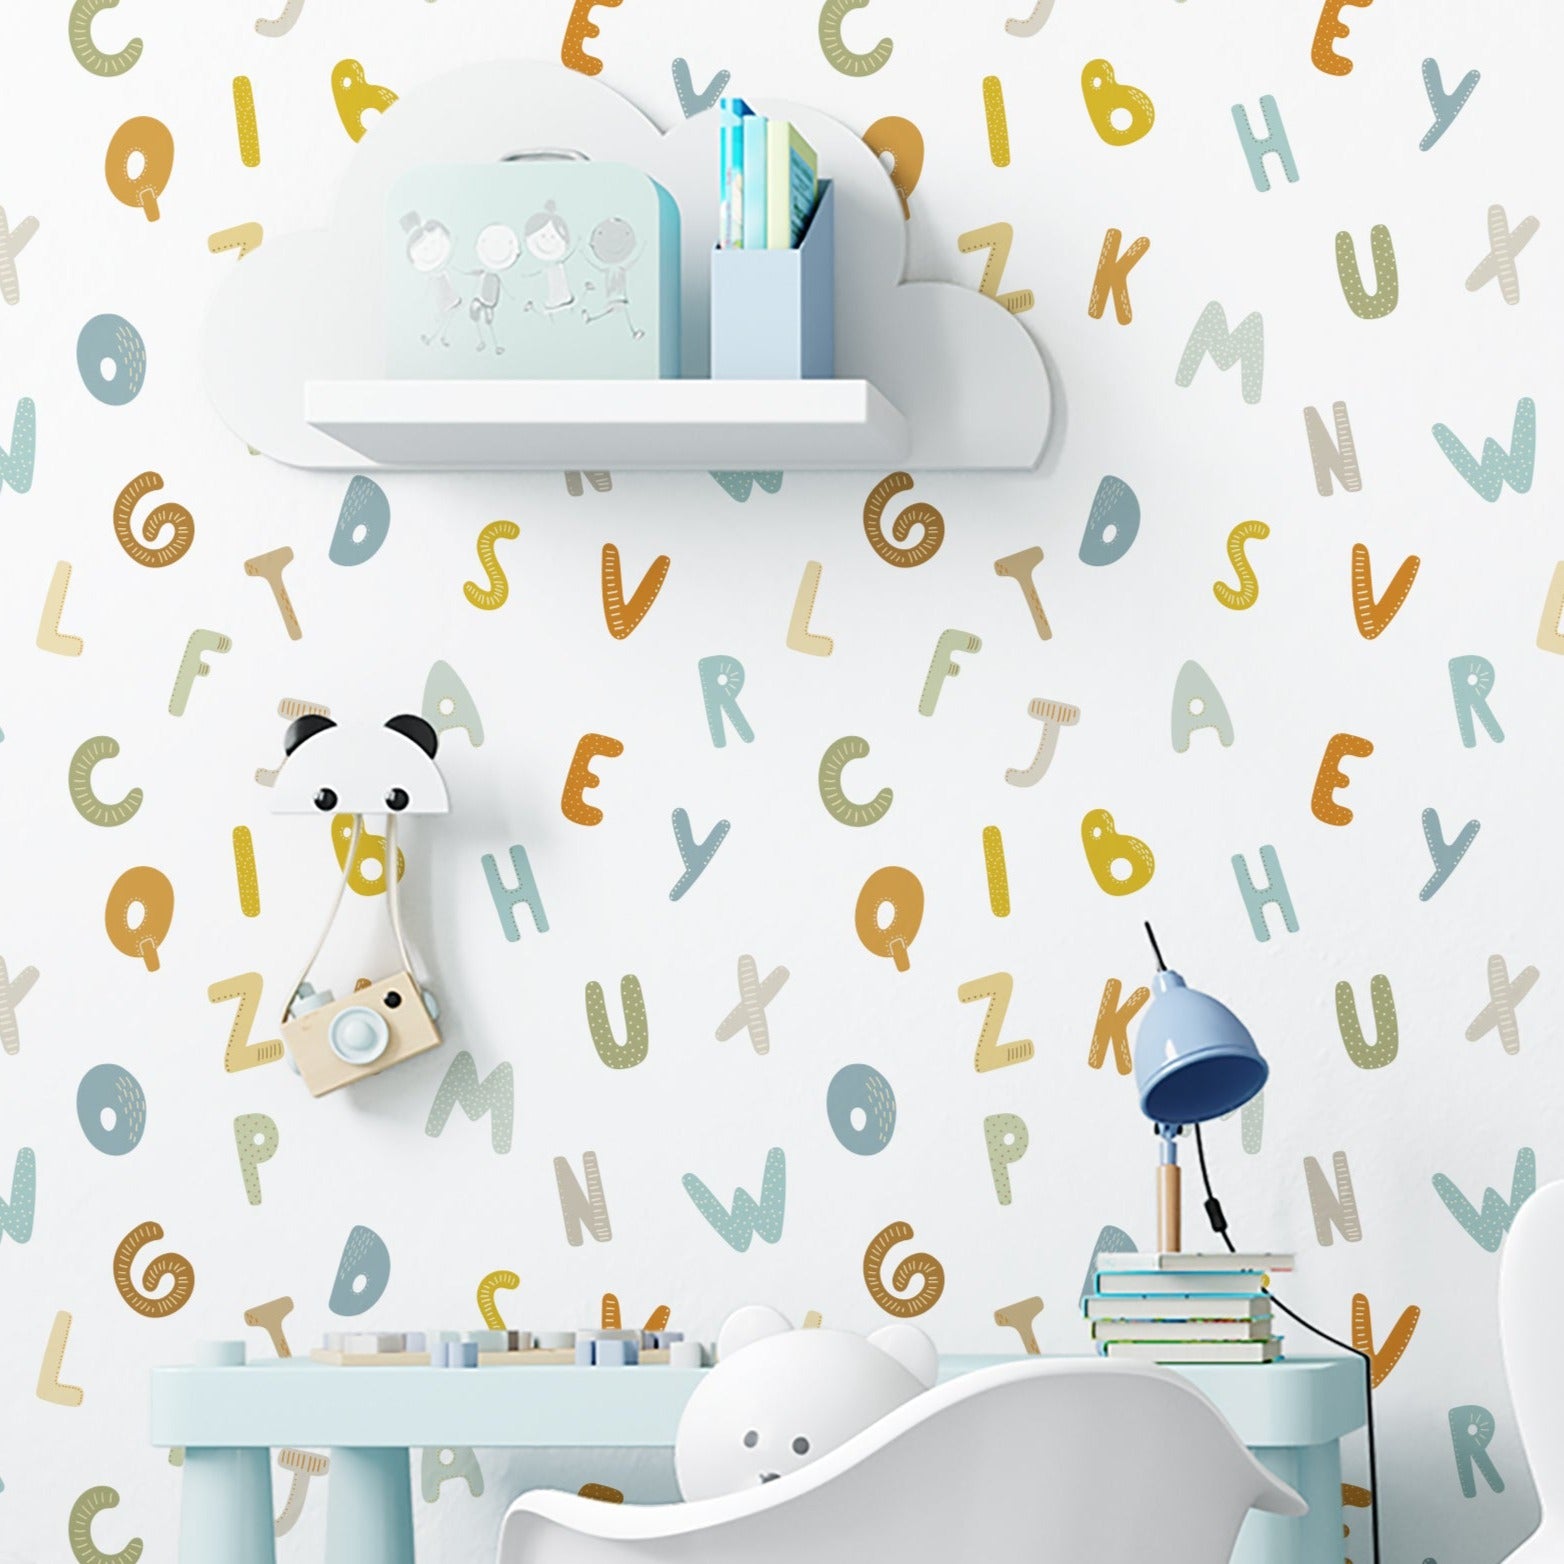 A child's nursery featuring 'Nursery Alphabet Wallpaper' with a playful array of multicolored letters in various fonts and patterns scattered across a white backdrop. A white elephant-shaped lamp and a whimsical bunny chair add to the room's fun, educational theme.